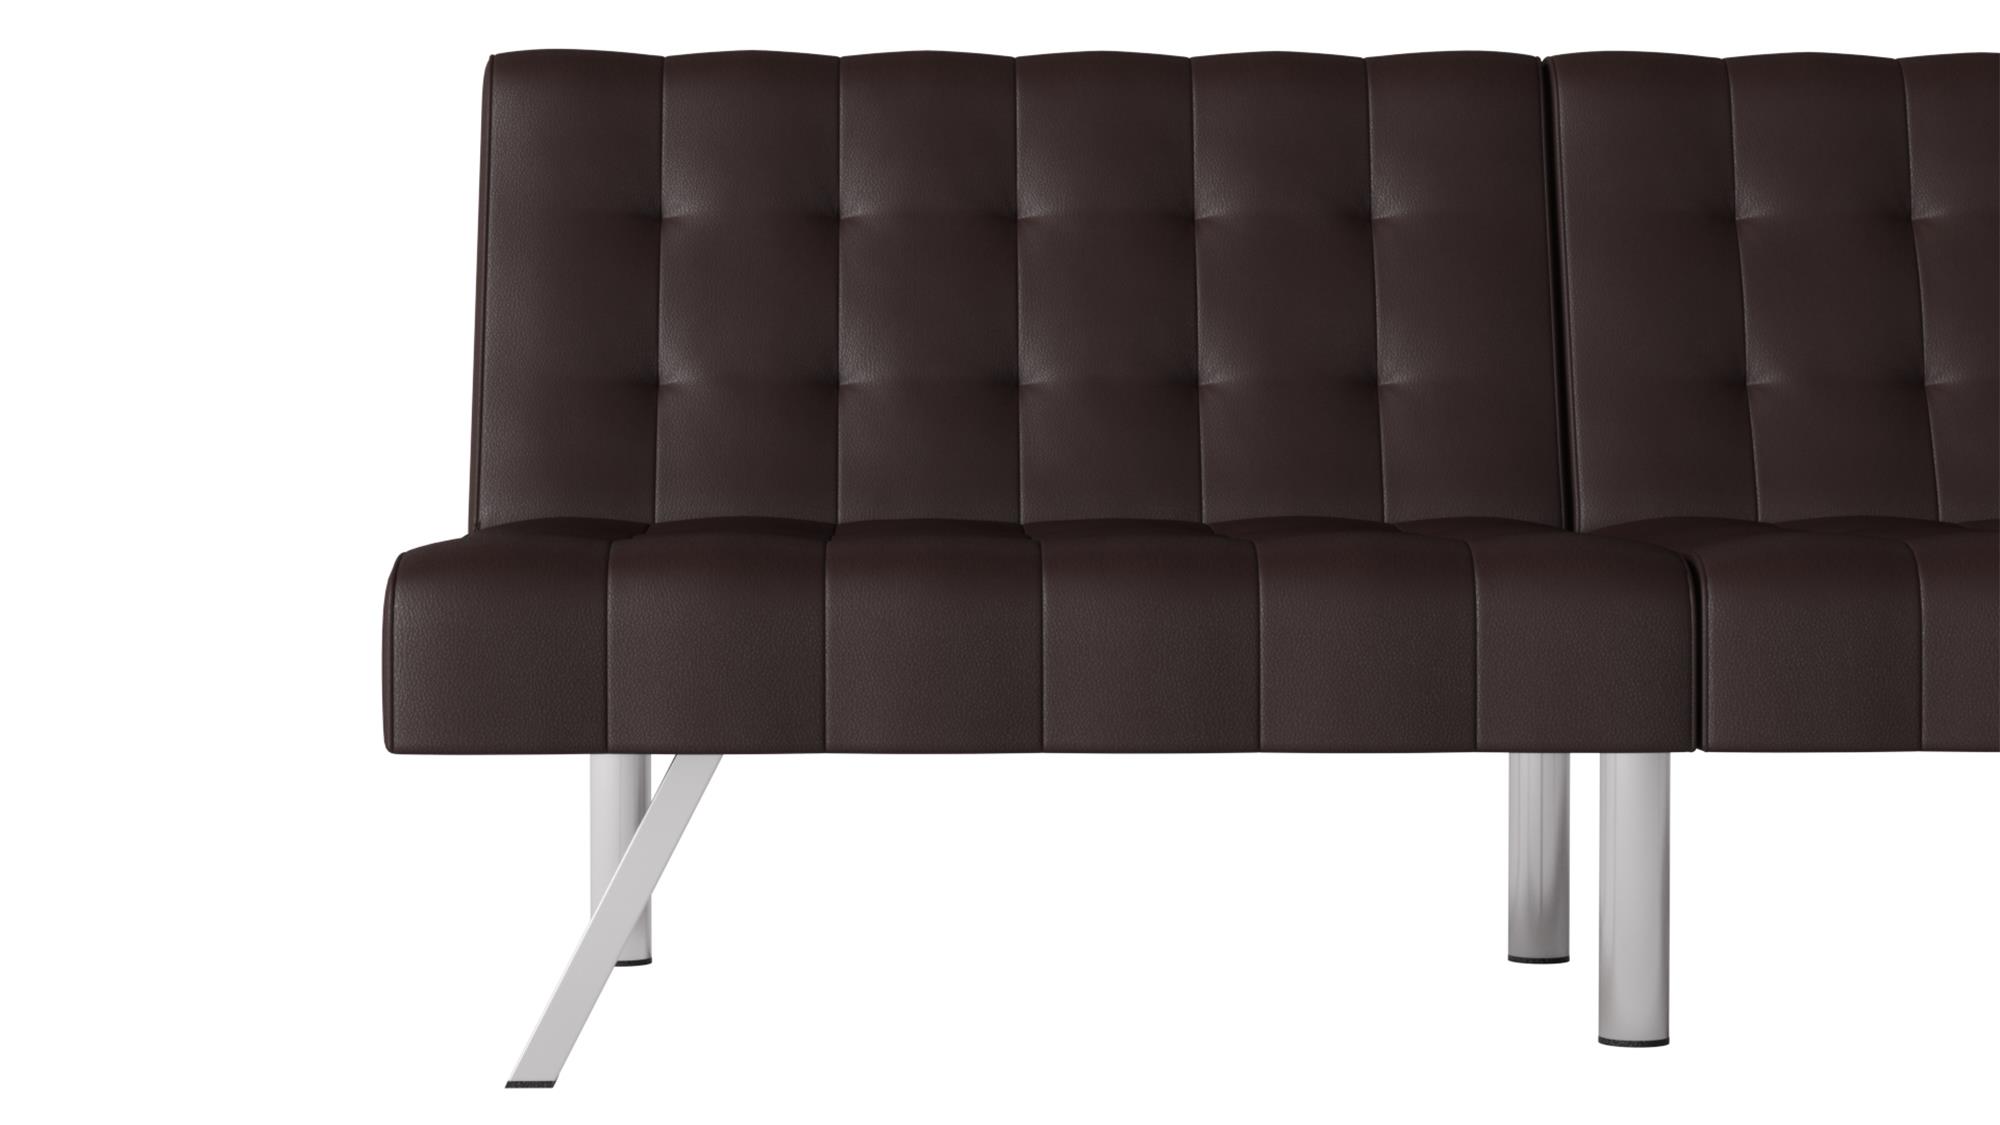 Mainstays Morgan Futon, Brown Faux Leather - image 2 of 15